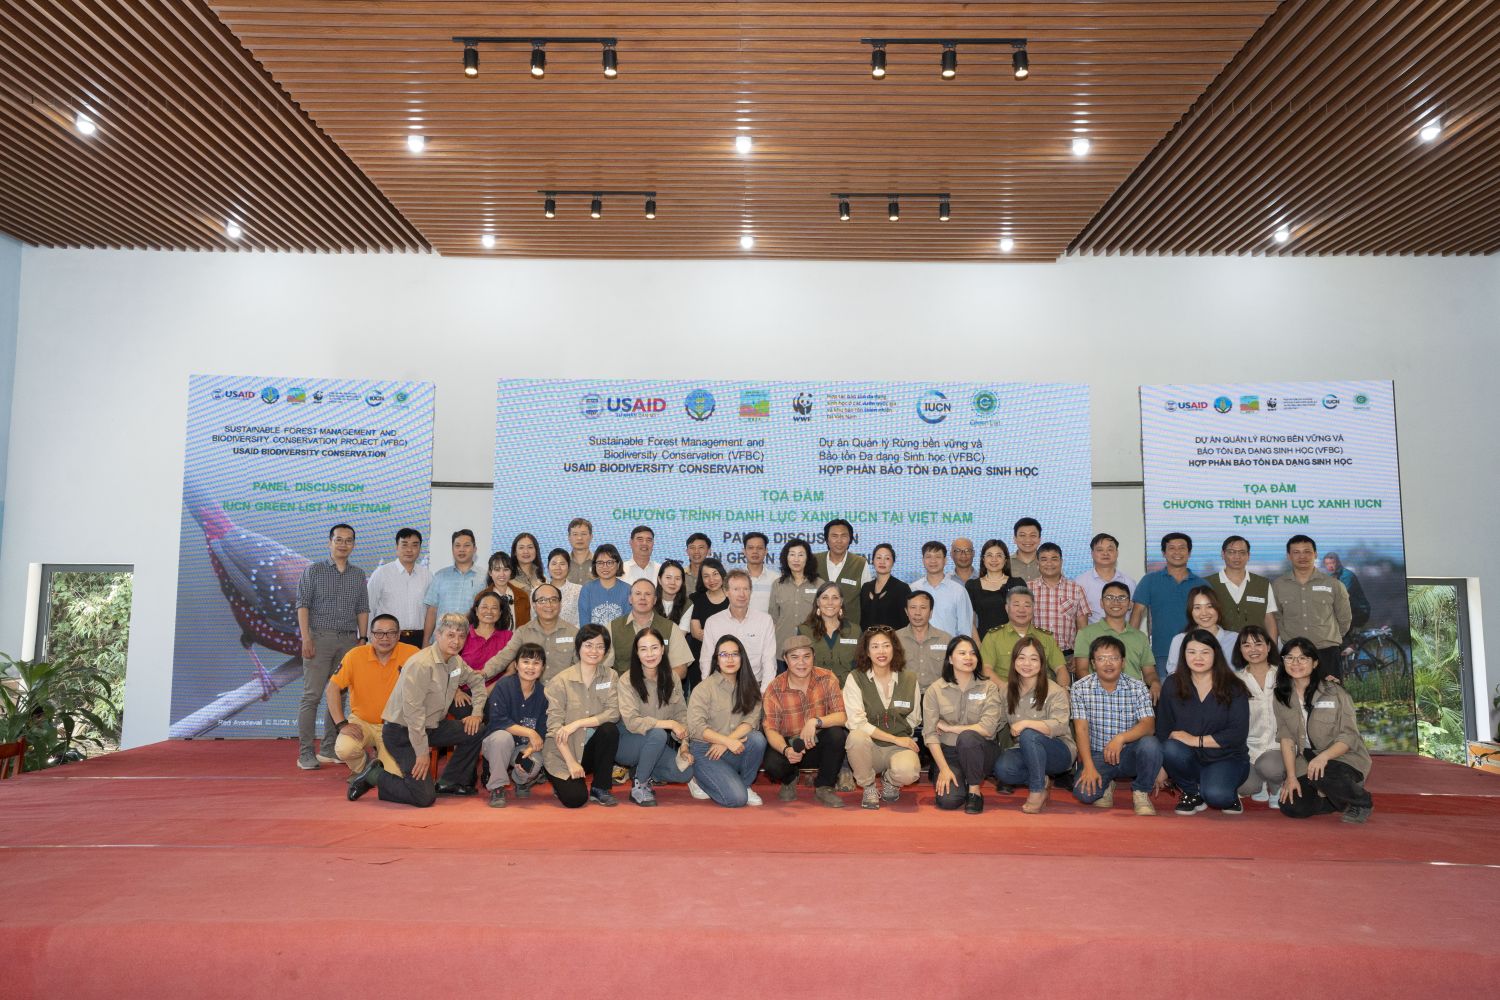 Group photo of the stakeholder meeting